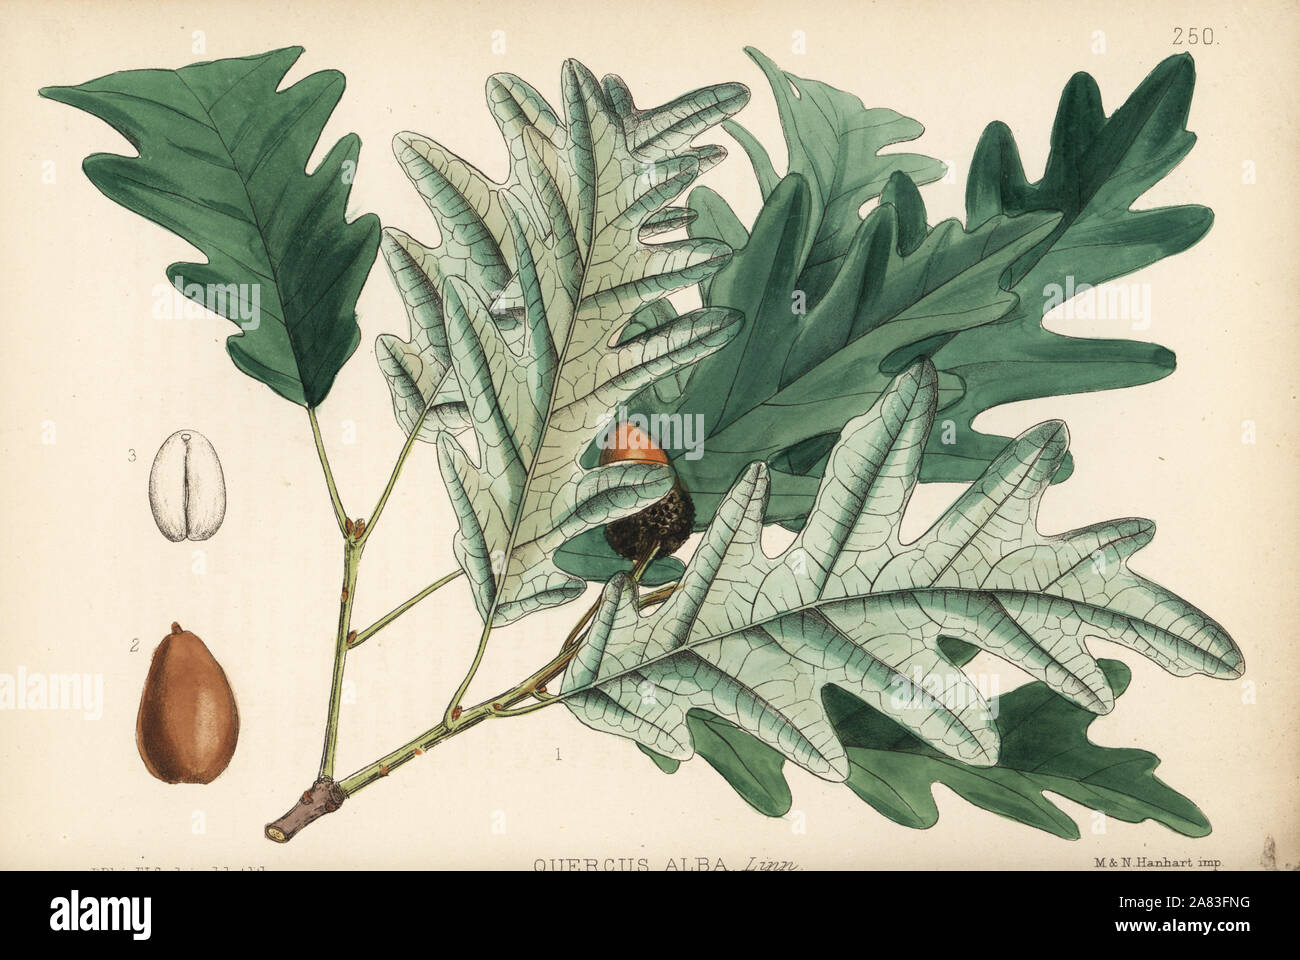 White oak or valley oak, Quercus alba. Handcoloured lithograph by Hanhart after a botanical illustration by David Blair from Robert Bentley and Henry Trimen's Medicinal Plants, London, 1880. Stock Photo